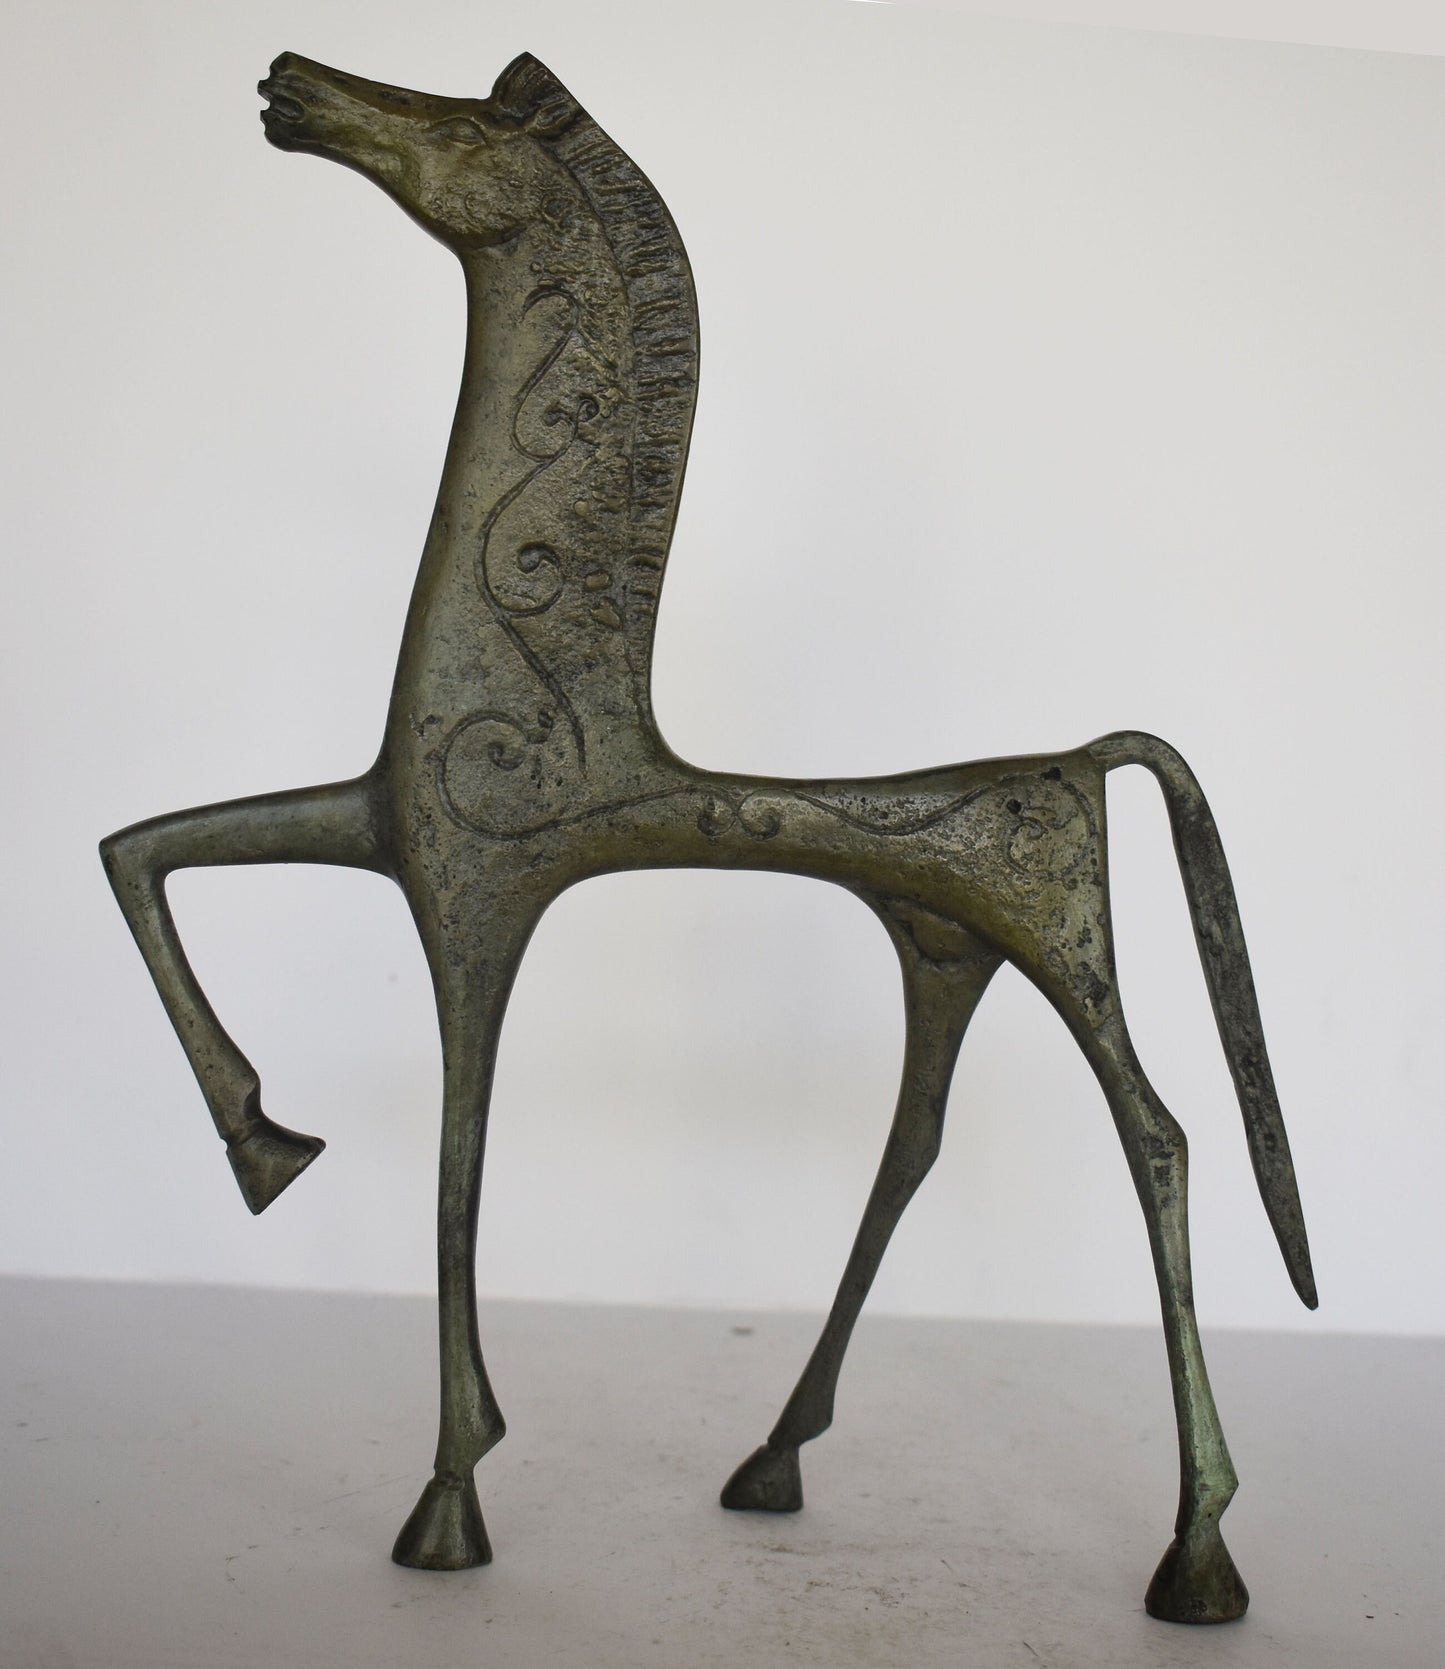 Ancient Greek Horse - pure Bronze Sculpture - Quality Art - Symbol of Wealth and Prosperity